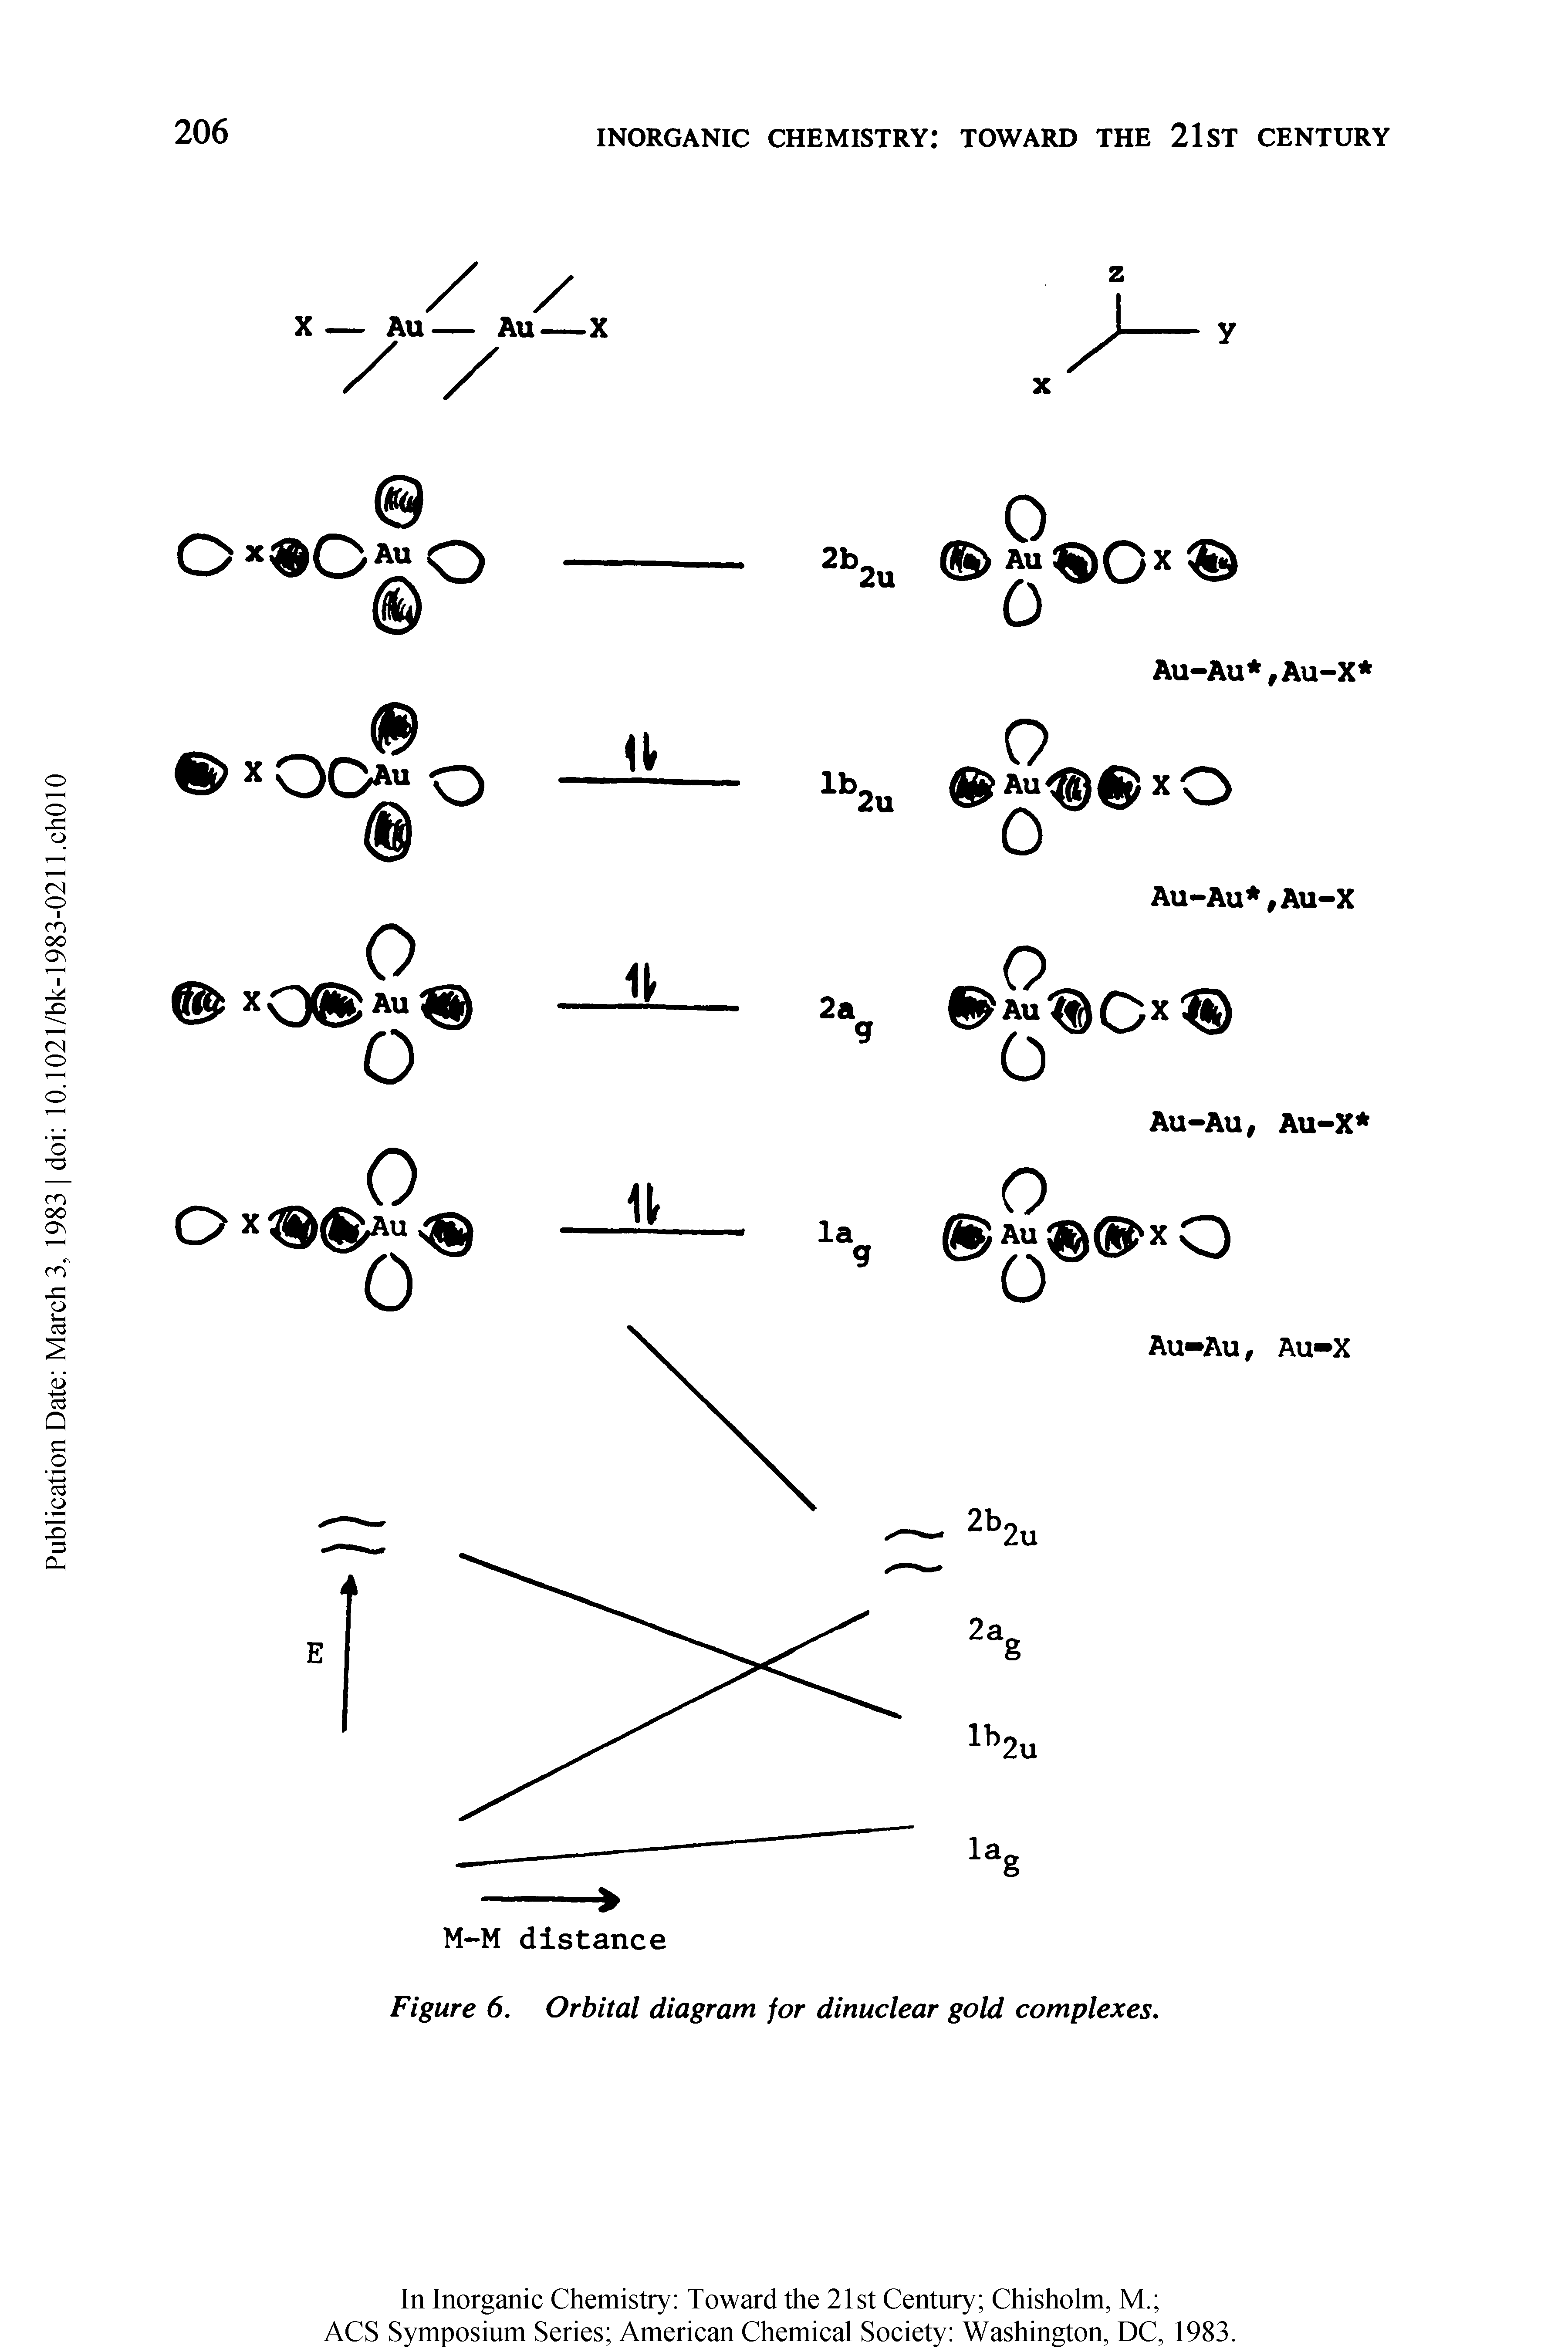 Figure 6. Orbital diagram for dinuclear gold complexes.